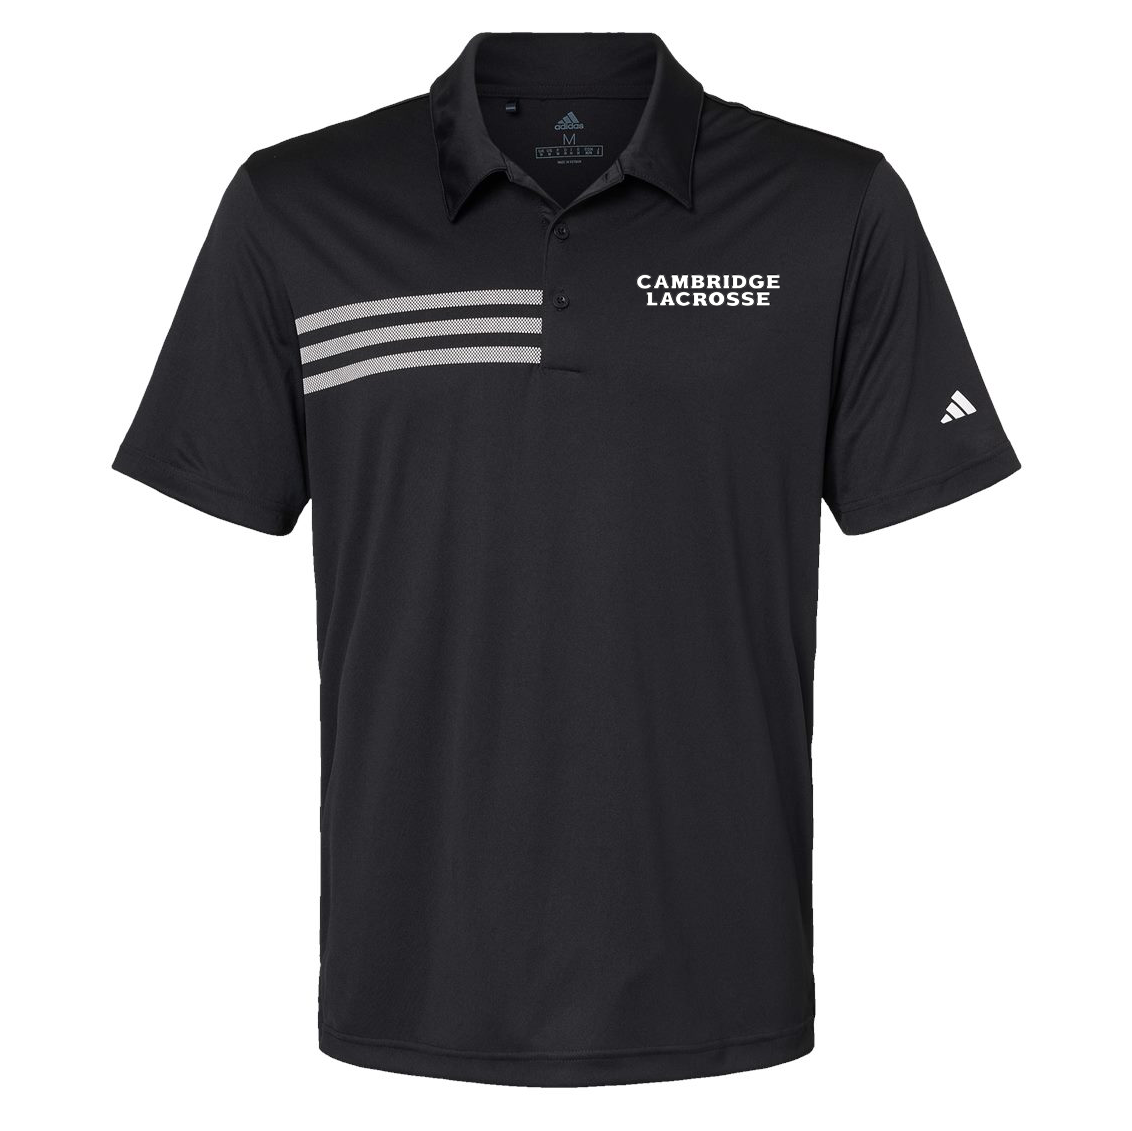 Cambridge Youth Lacrosse Adidas 3-Stripes Chest Polo